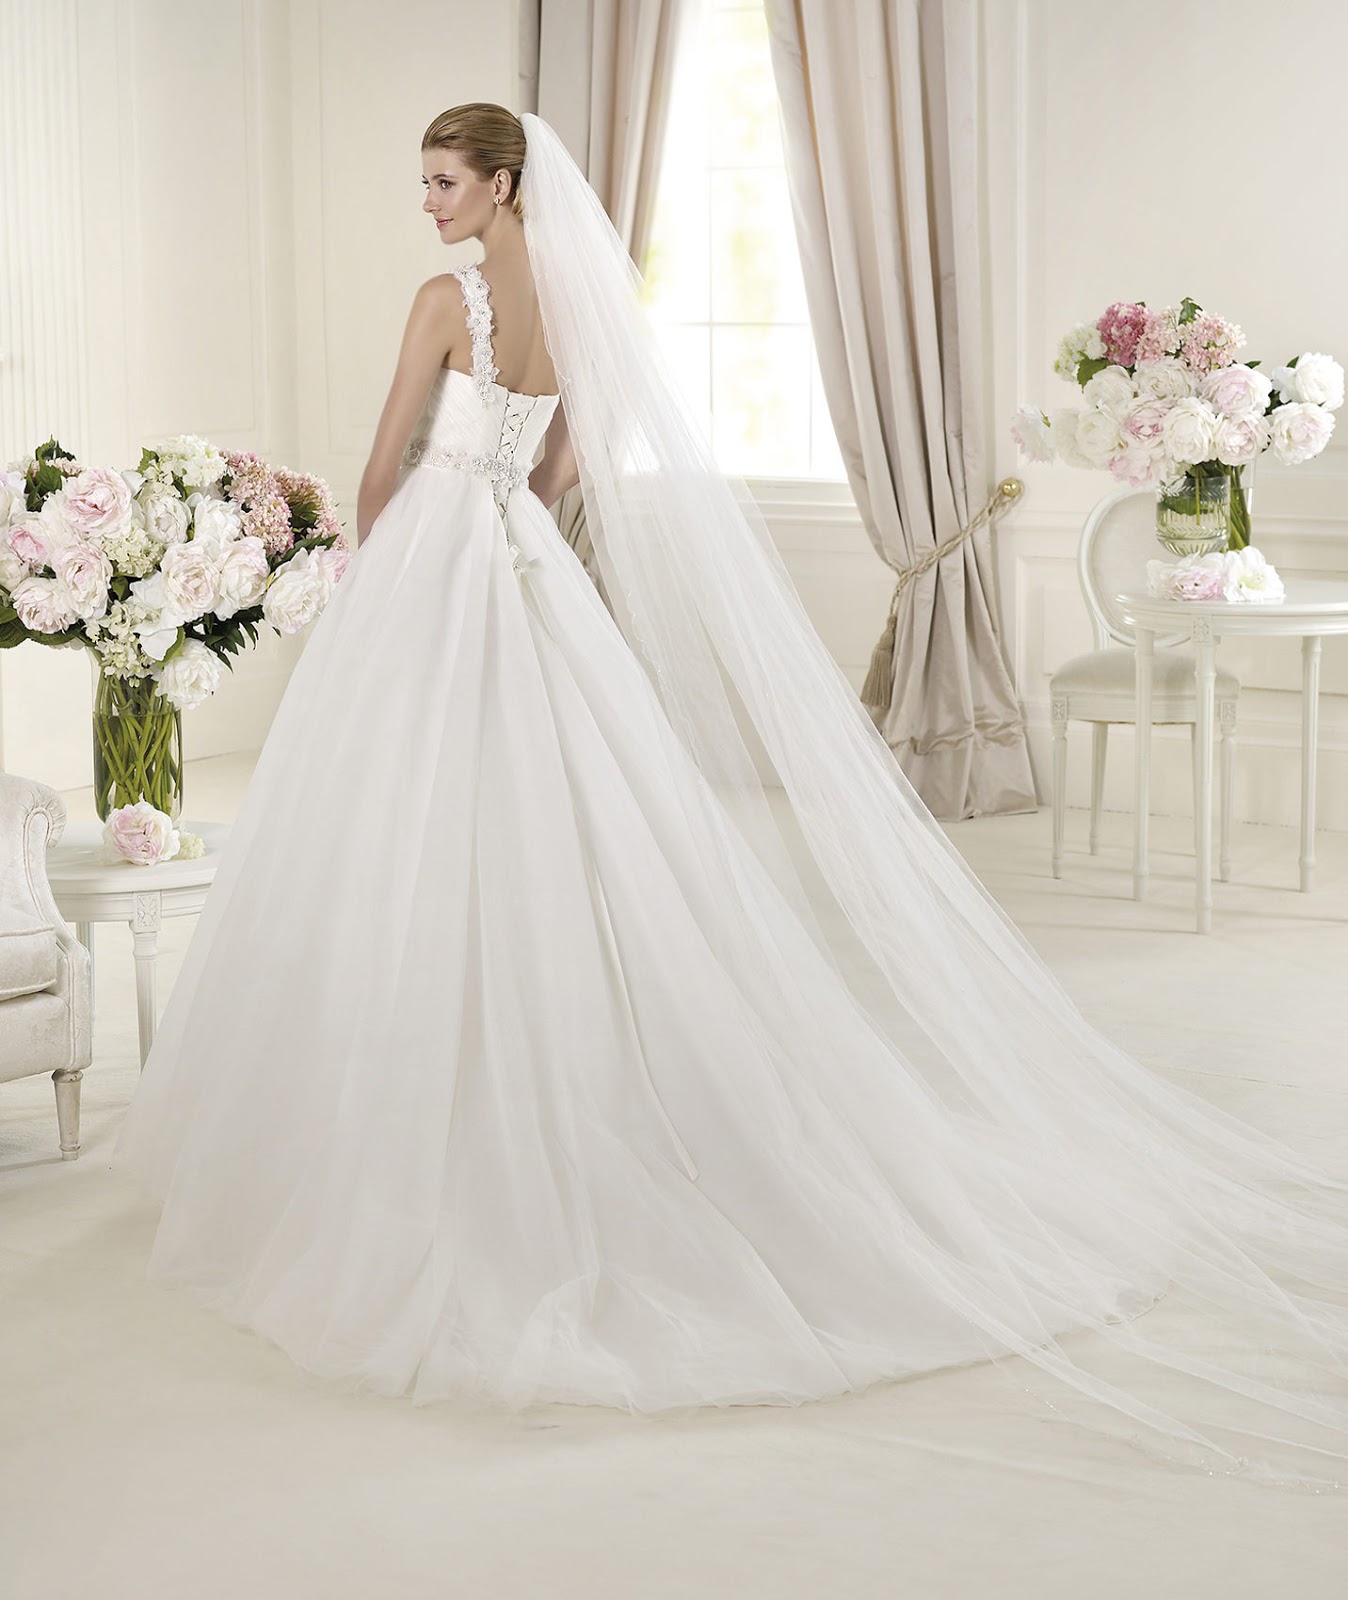 IN LOVE WITH BEAUTY: 2013 Pronovias Glamour Collection - part 2